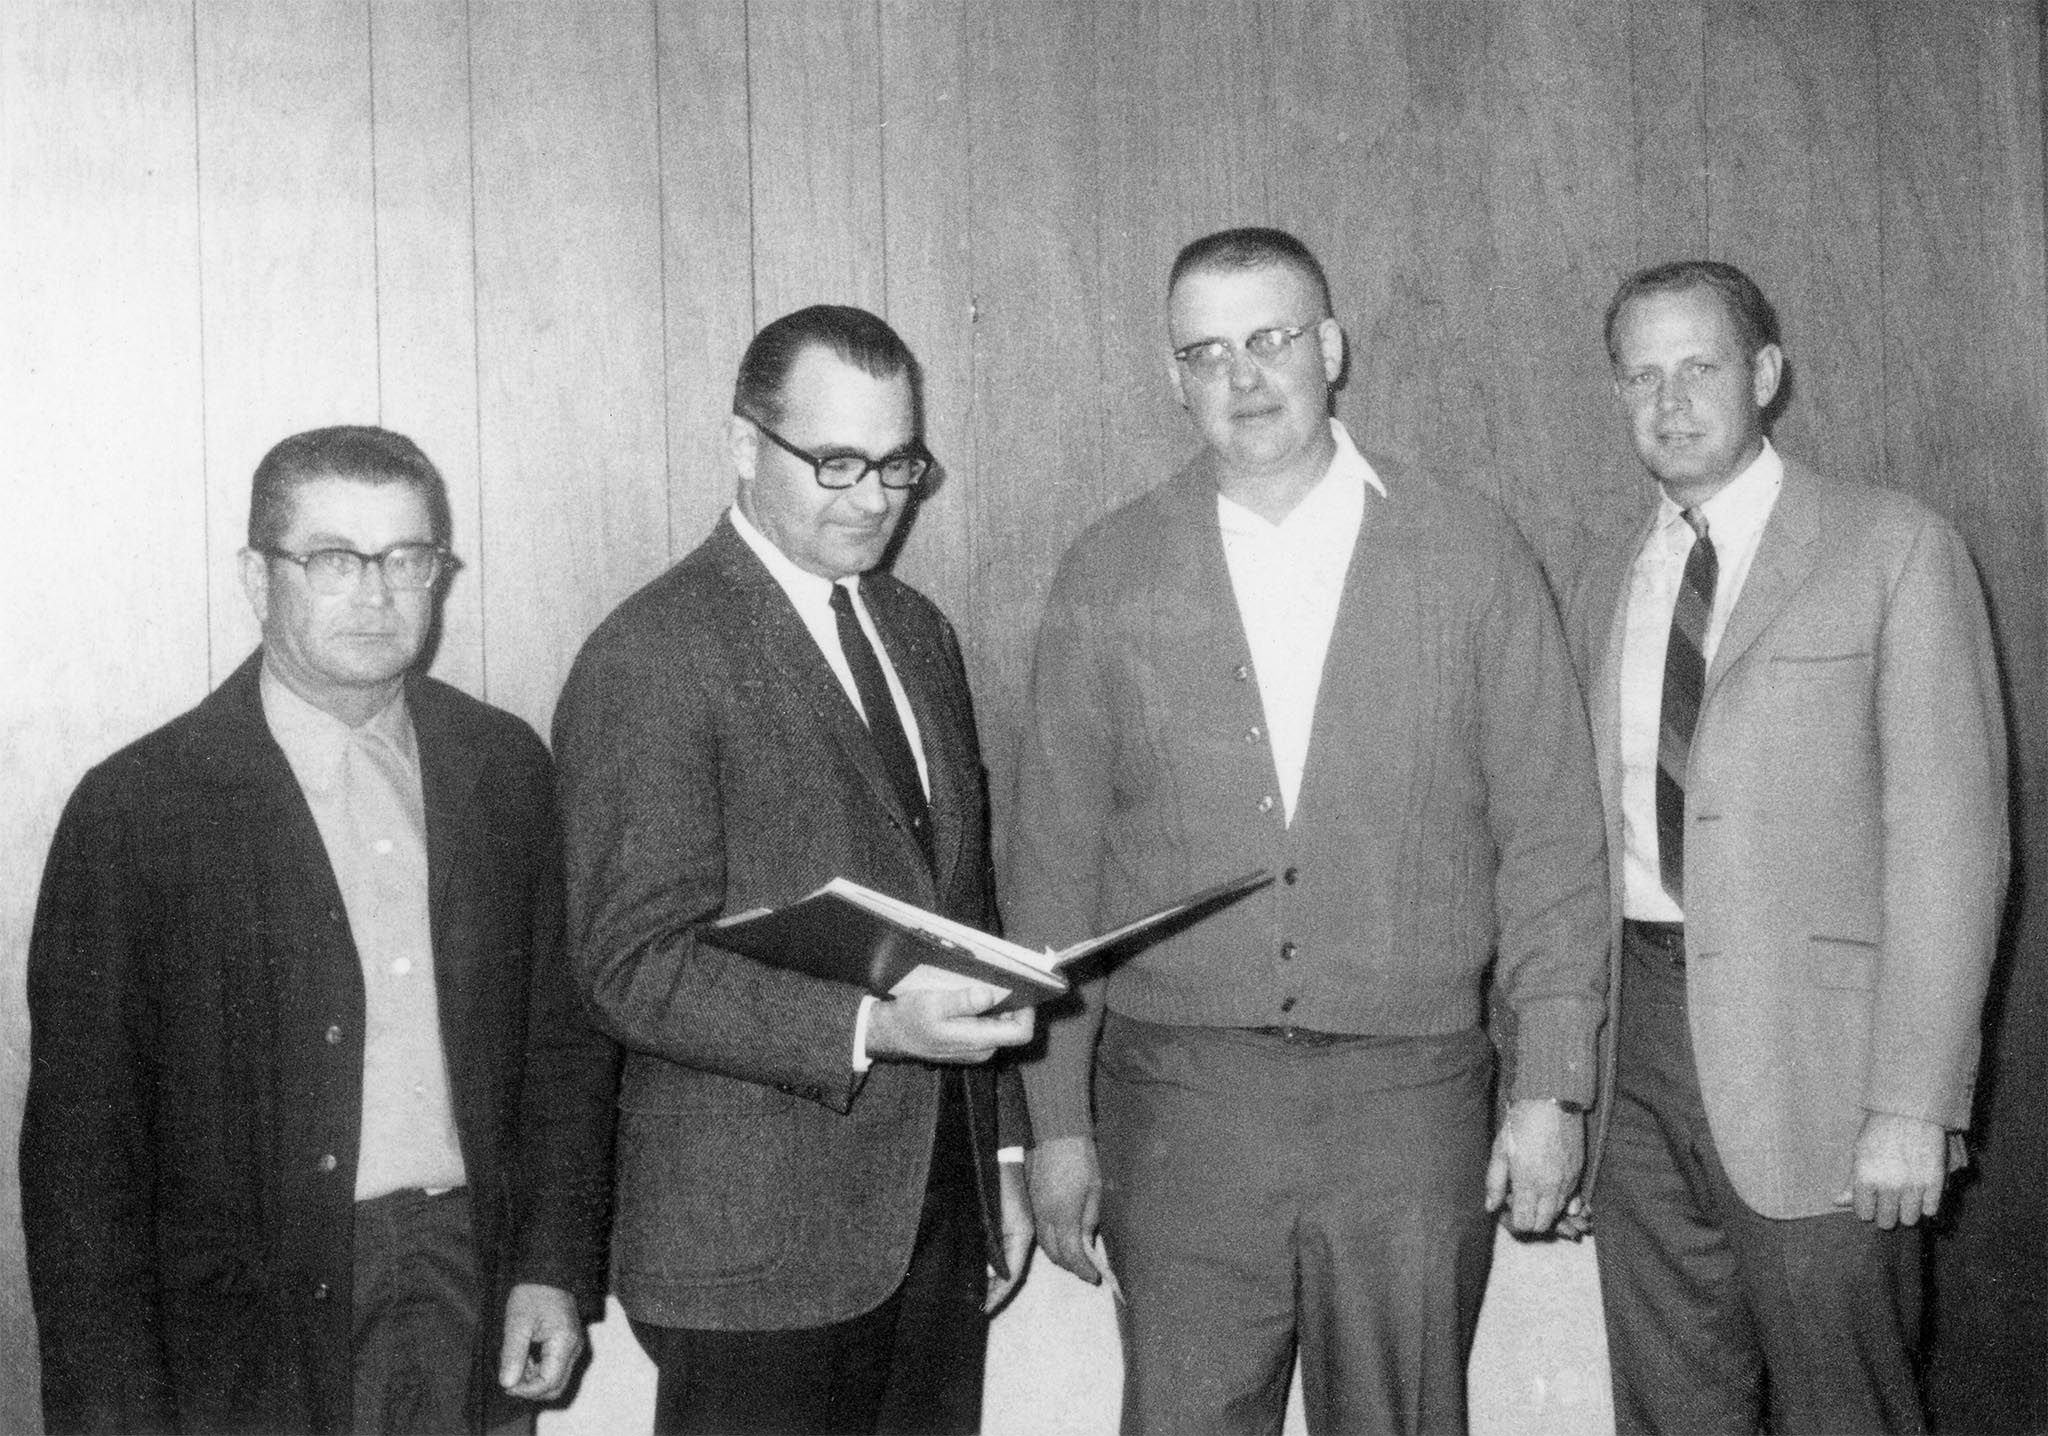 In 1968, Texas County was the focal point of a silage survey conducted by the American Agricultural Marketing Association as part of a multi-state study of silage marketing. Shown looking over some of the data gathered in the survey are Norman Hinds, Texas County Farm Bureau Board member; Tom Bennett, AAMA research staff member; Ronald Wagner, Texas County Farm Bureau President; and Virgil Higgins, Texas County Farm Bureau Board member.